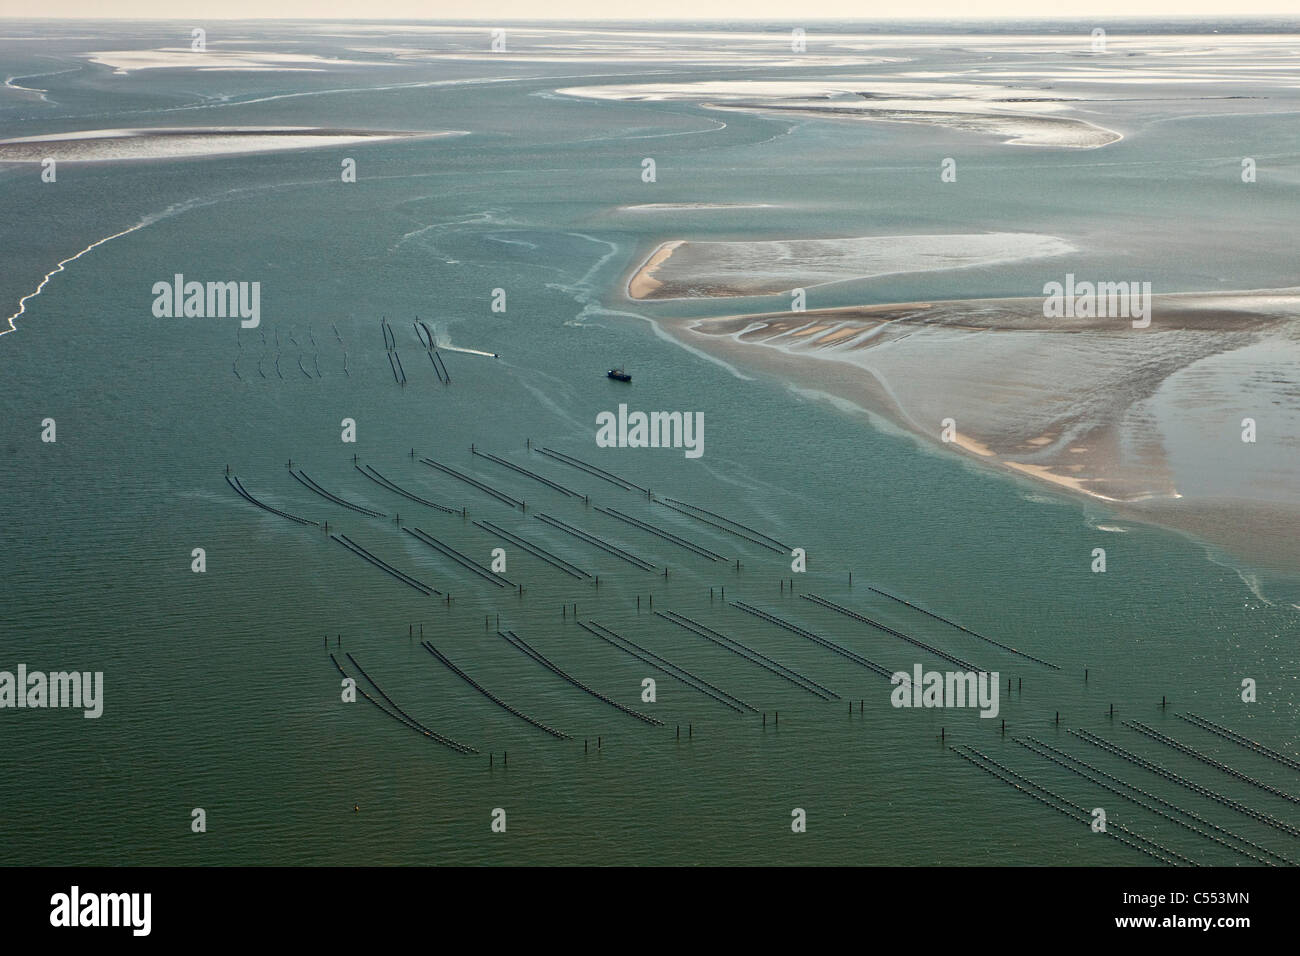 The Netherlands, Island Terschelling, group of islands called Wadden Sea. Mussel, mussels  culture. Aerial. Stock Photo